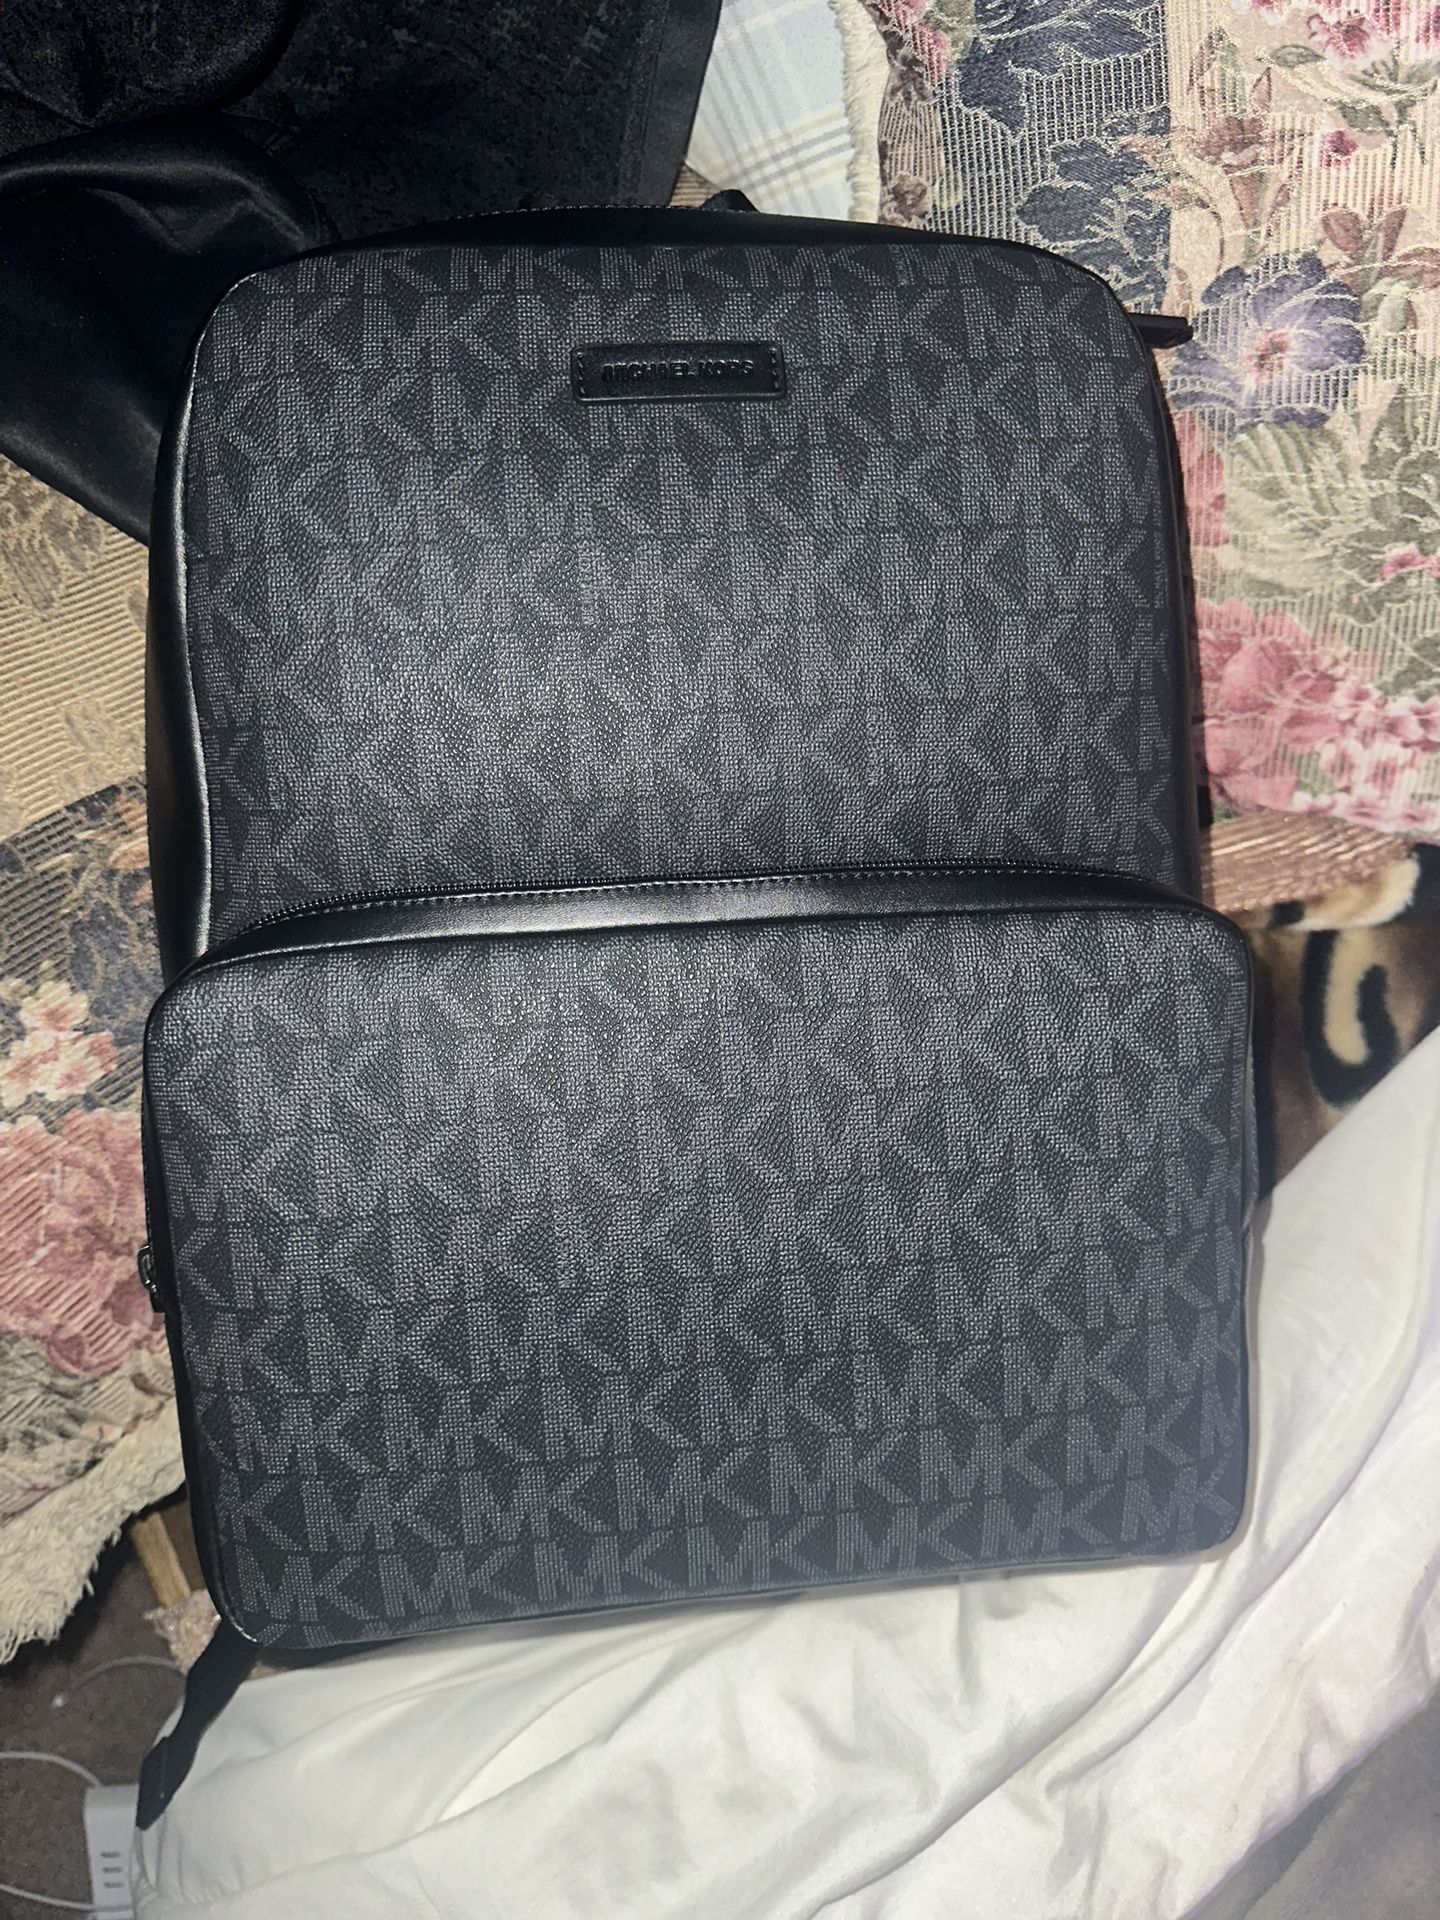 Michael Kors Black Backpack for Sale in Las Cruces, NM - OfferUp